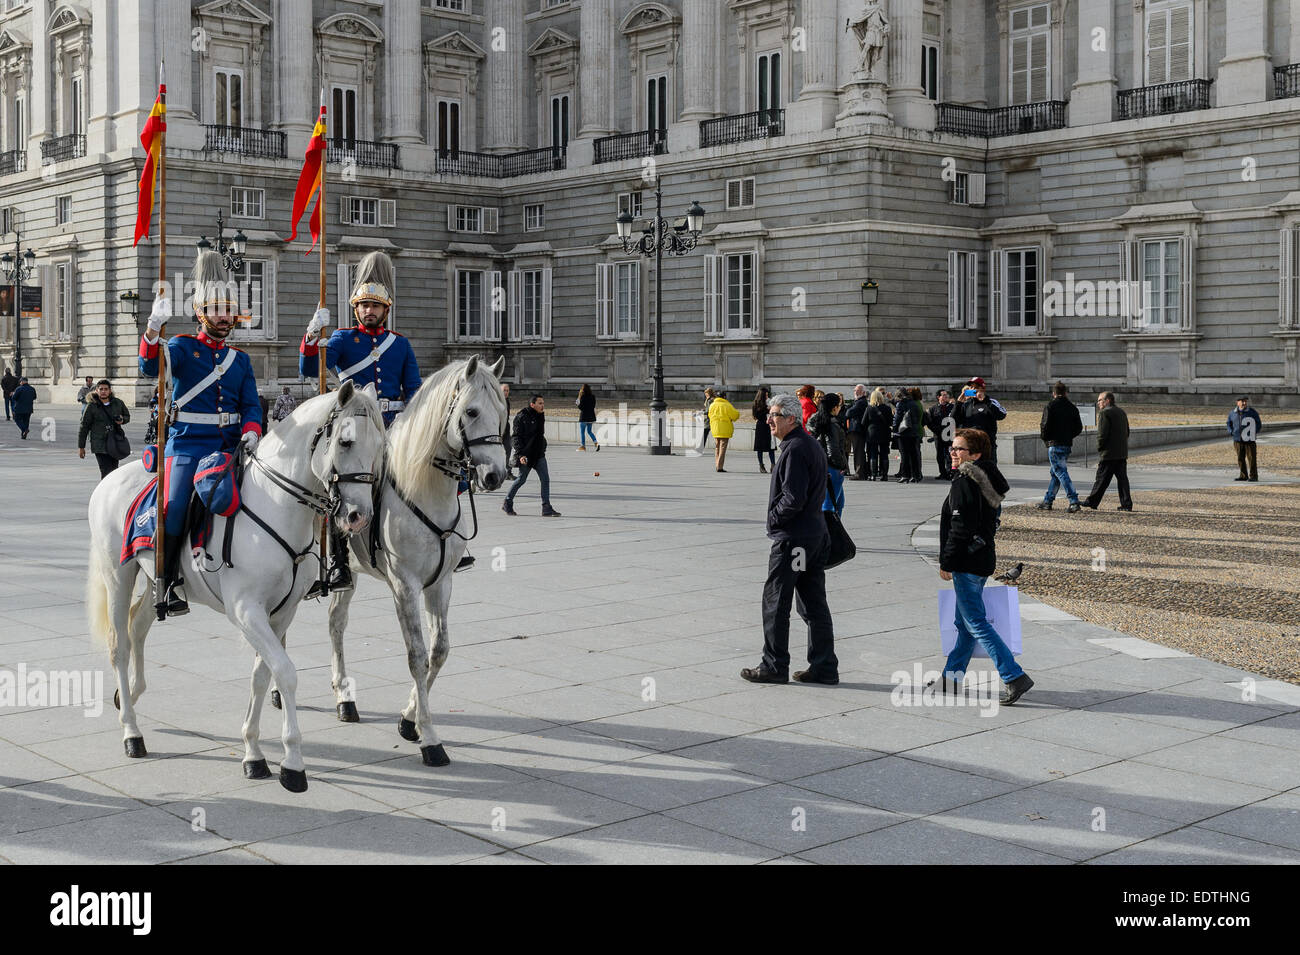 The Royal Guards on horseback in front of the Royal Palace in Madrid Stock Photo